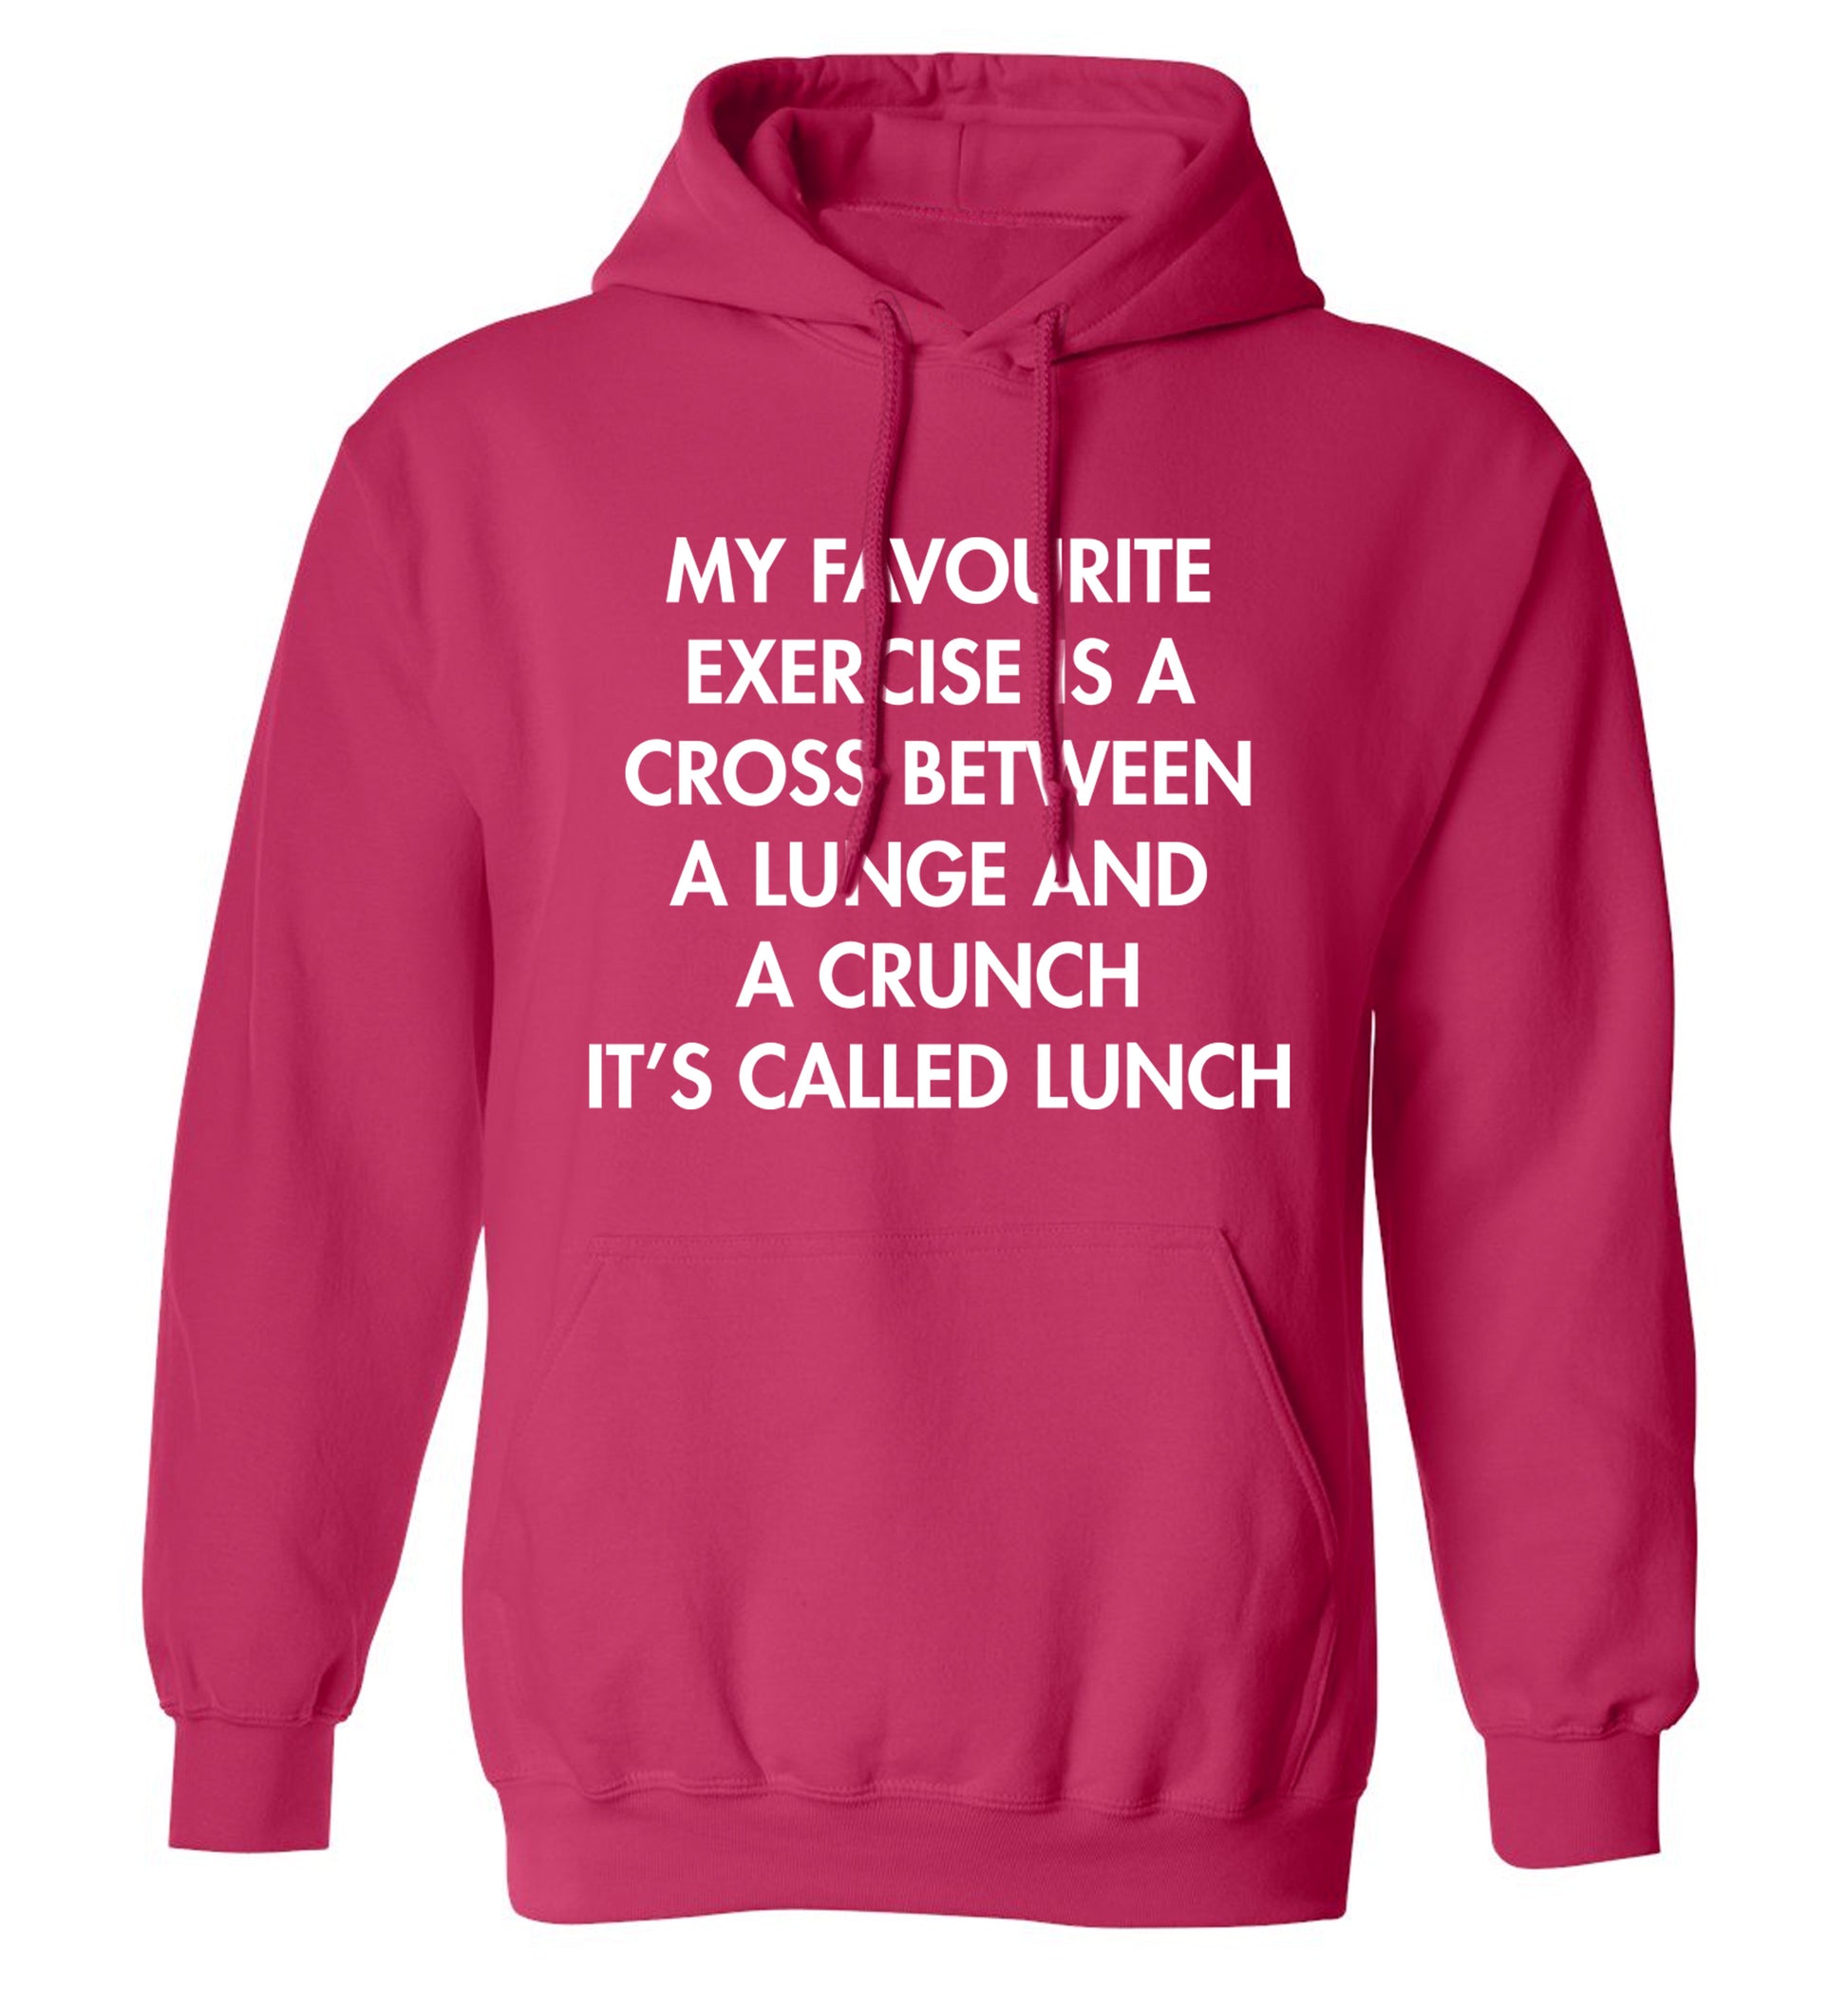 My favourite exercise is a cross between a lung and a crunch it's called lunch adults unisex pink hoodie 2XL